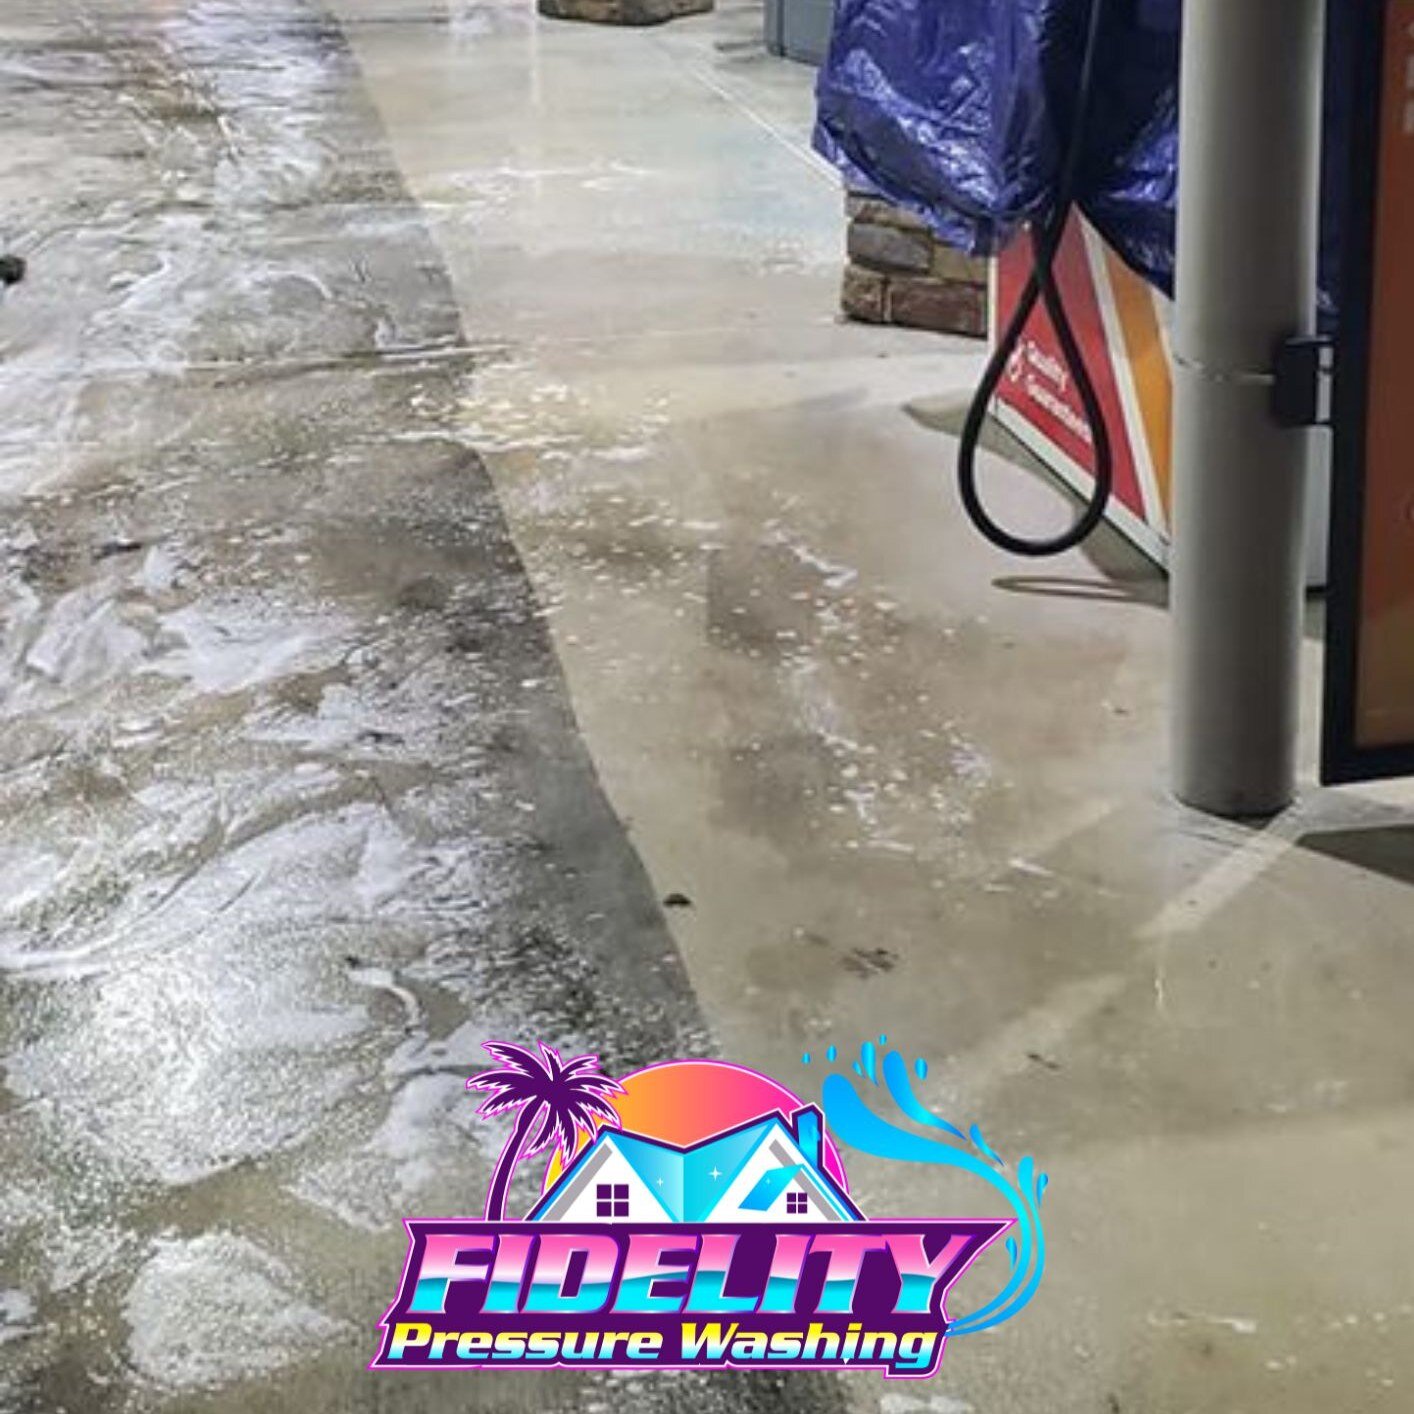 Power washing can boost the curb appeal of a commercial property by improving its appearance, value, safety and health. Read on to know more about the benefits of having your commercial property maintained by power washing. 

https://www.howto.cleani